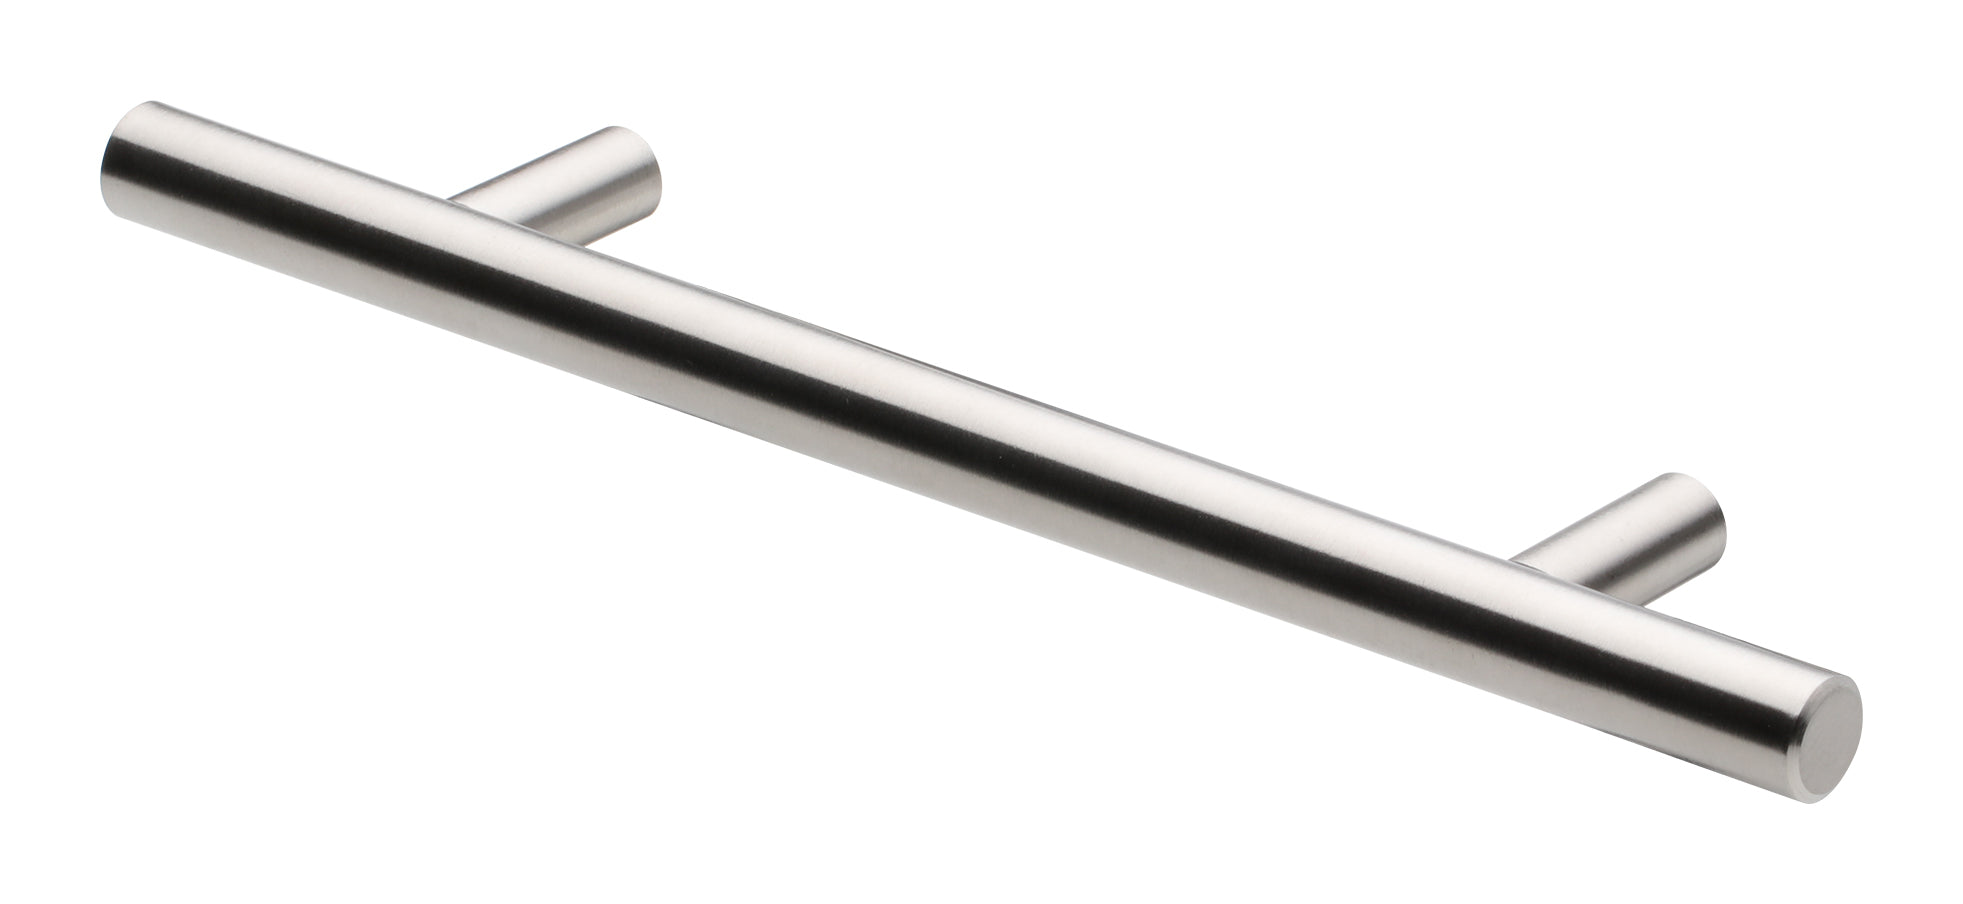 Silverline P5000s-HSS - 6 inch to 14 inch Hollow Stainless Steel T Bar Pull Cabinet Appliance Handle Various Sizes in Brushed Satin Nickel Finish